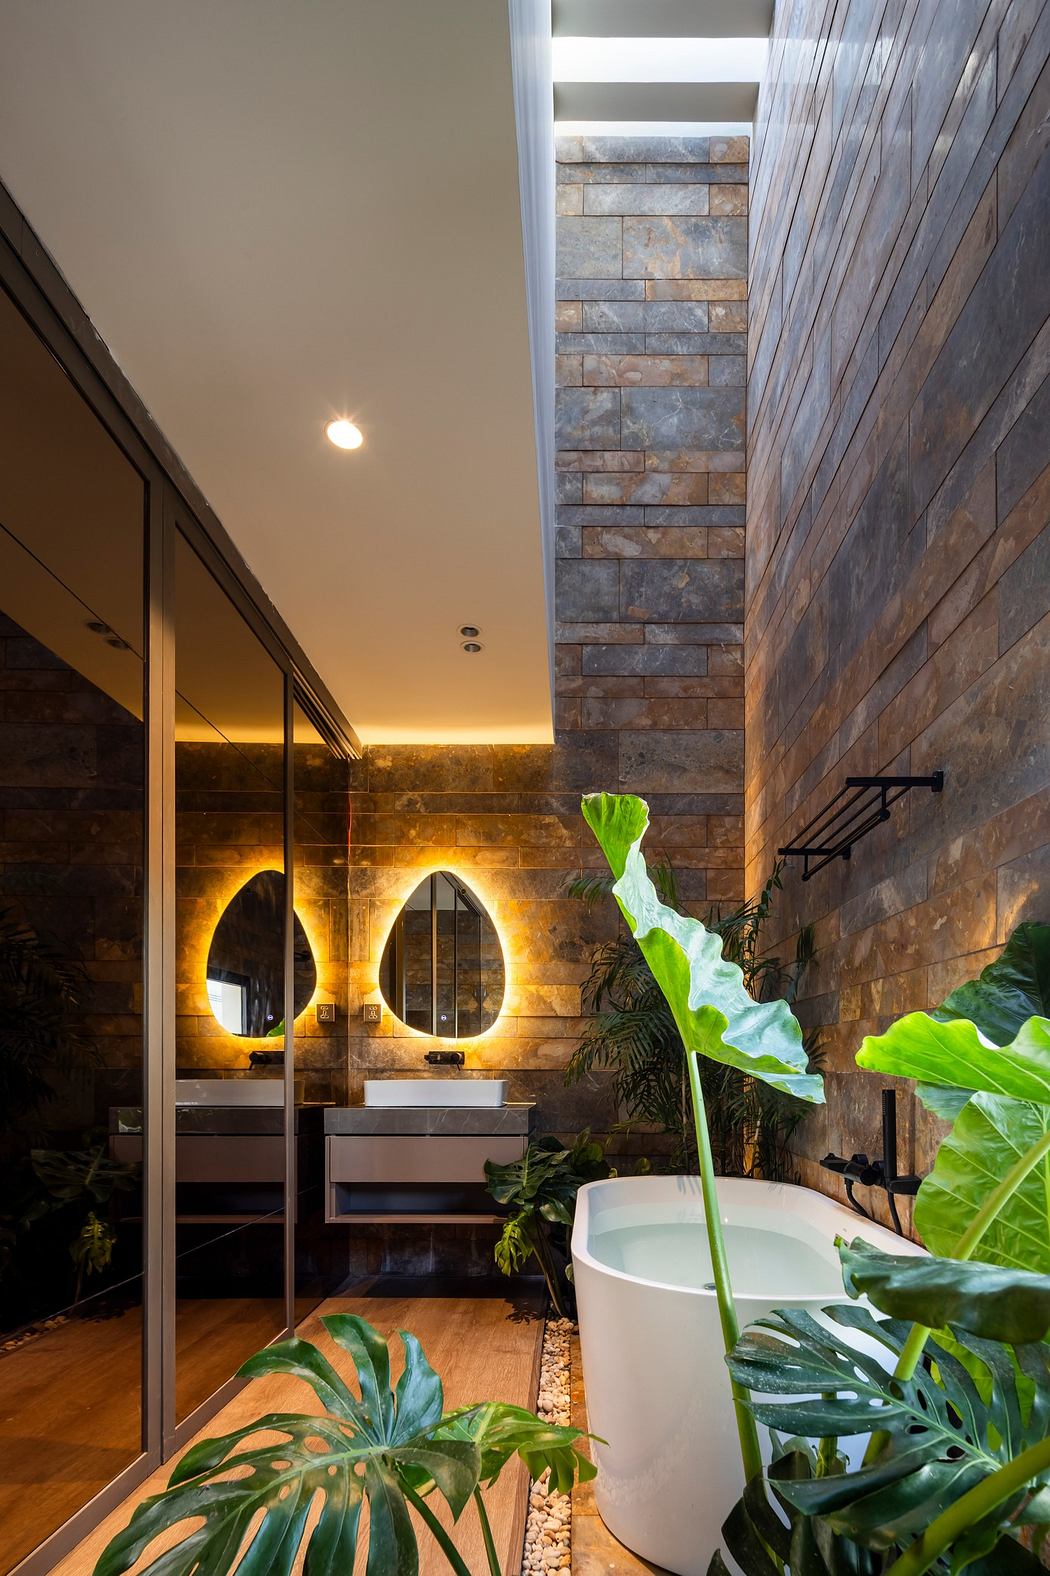 Modern bathroom with stone walls, green plants, and a freestanding tub.